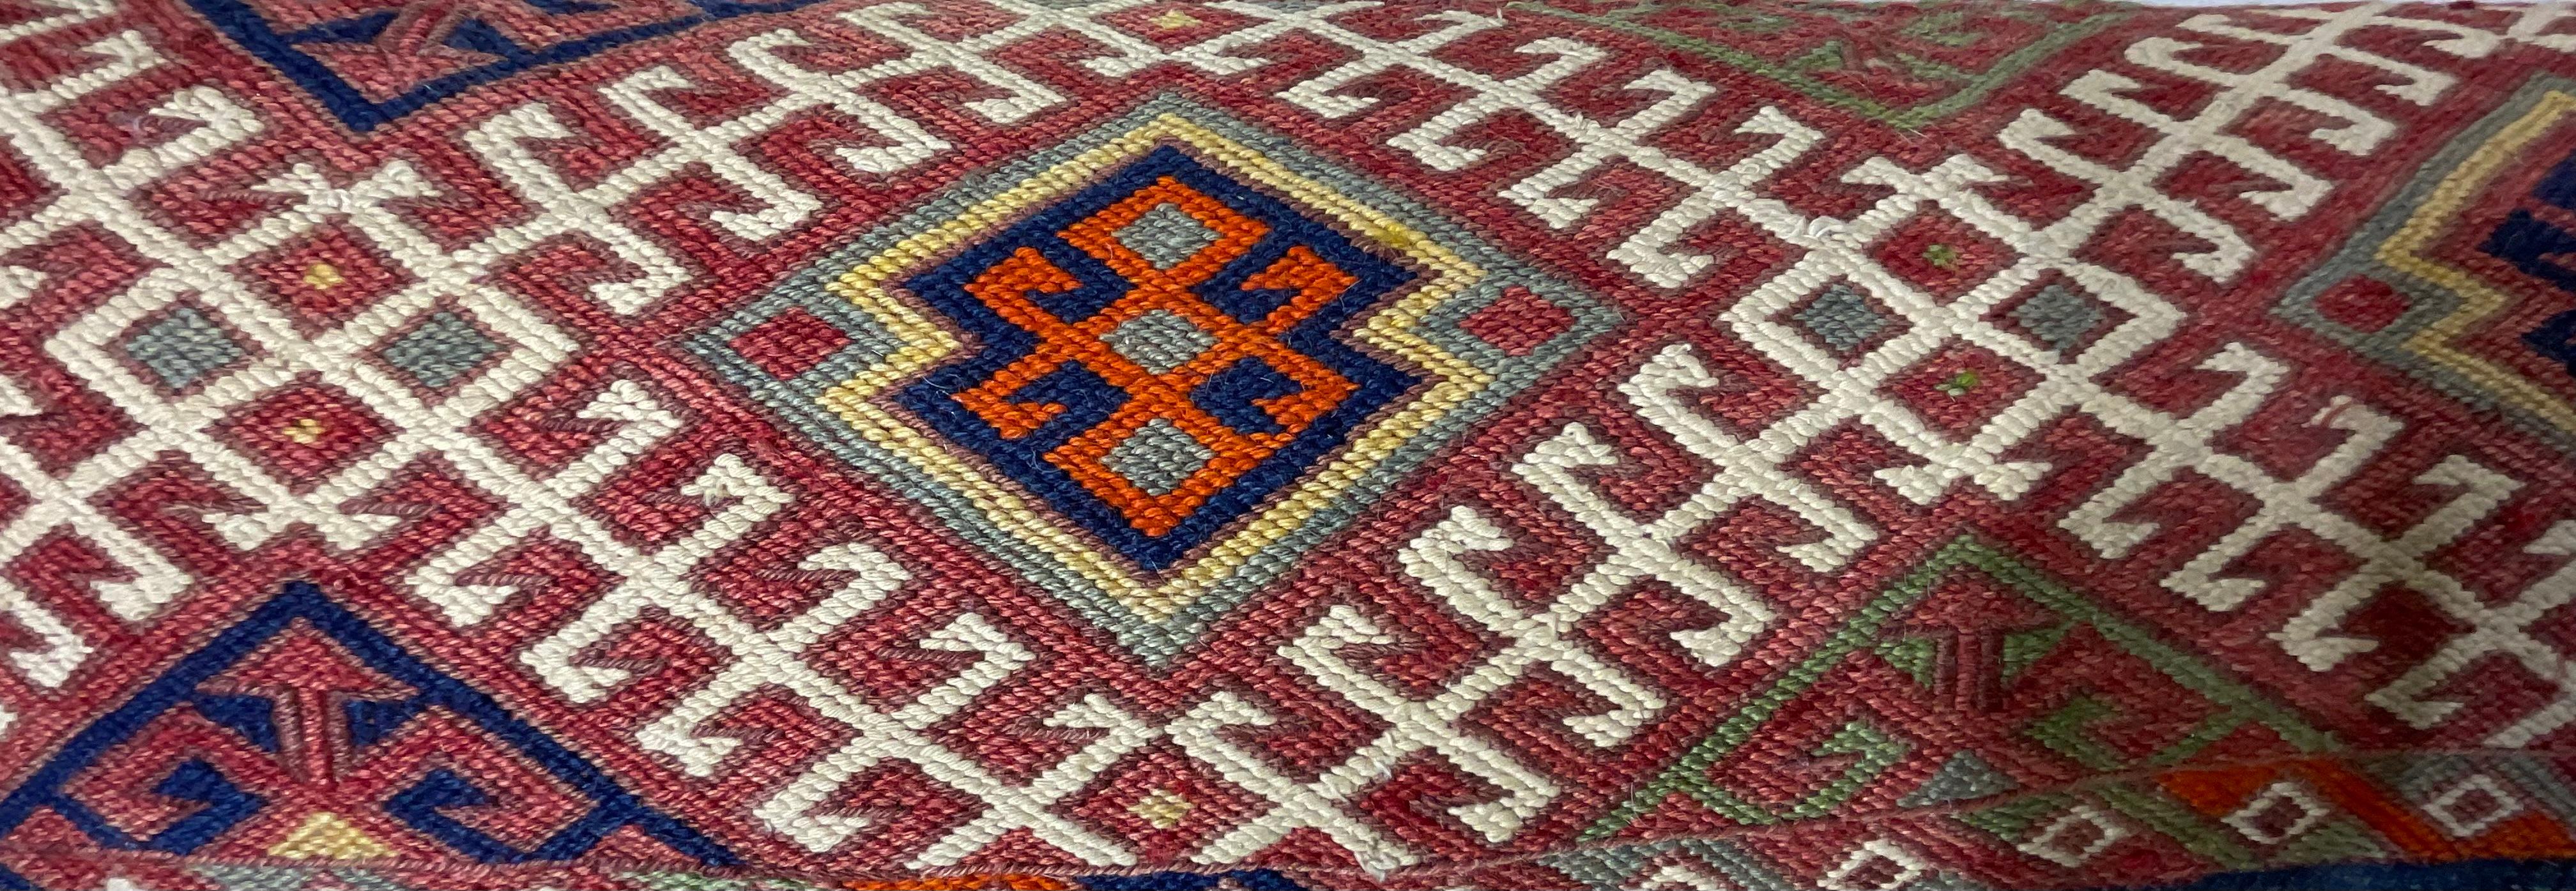 Flat-Weave Geometric Motif Kilim Rug Fragment Pillow In Good Condition For Sale In Delray Beach, FL